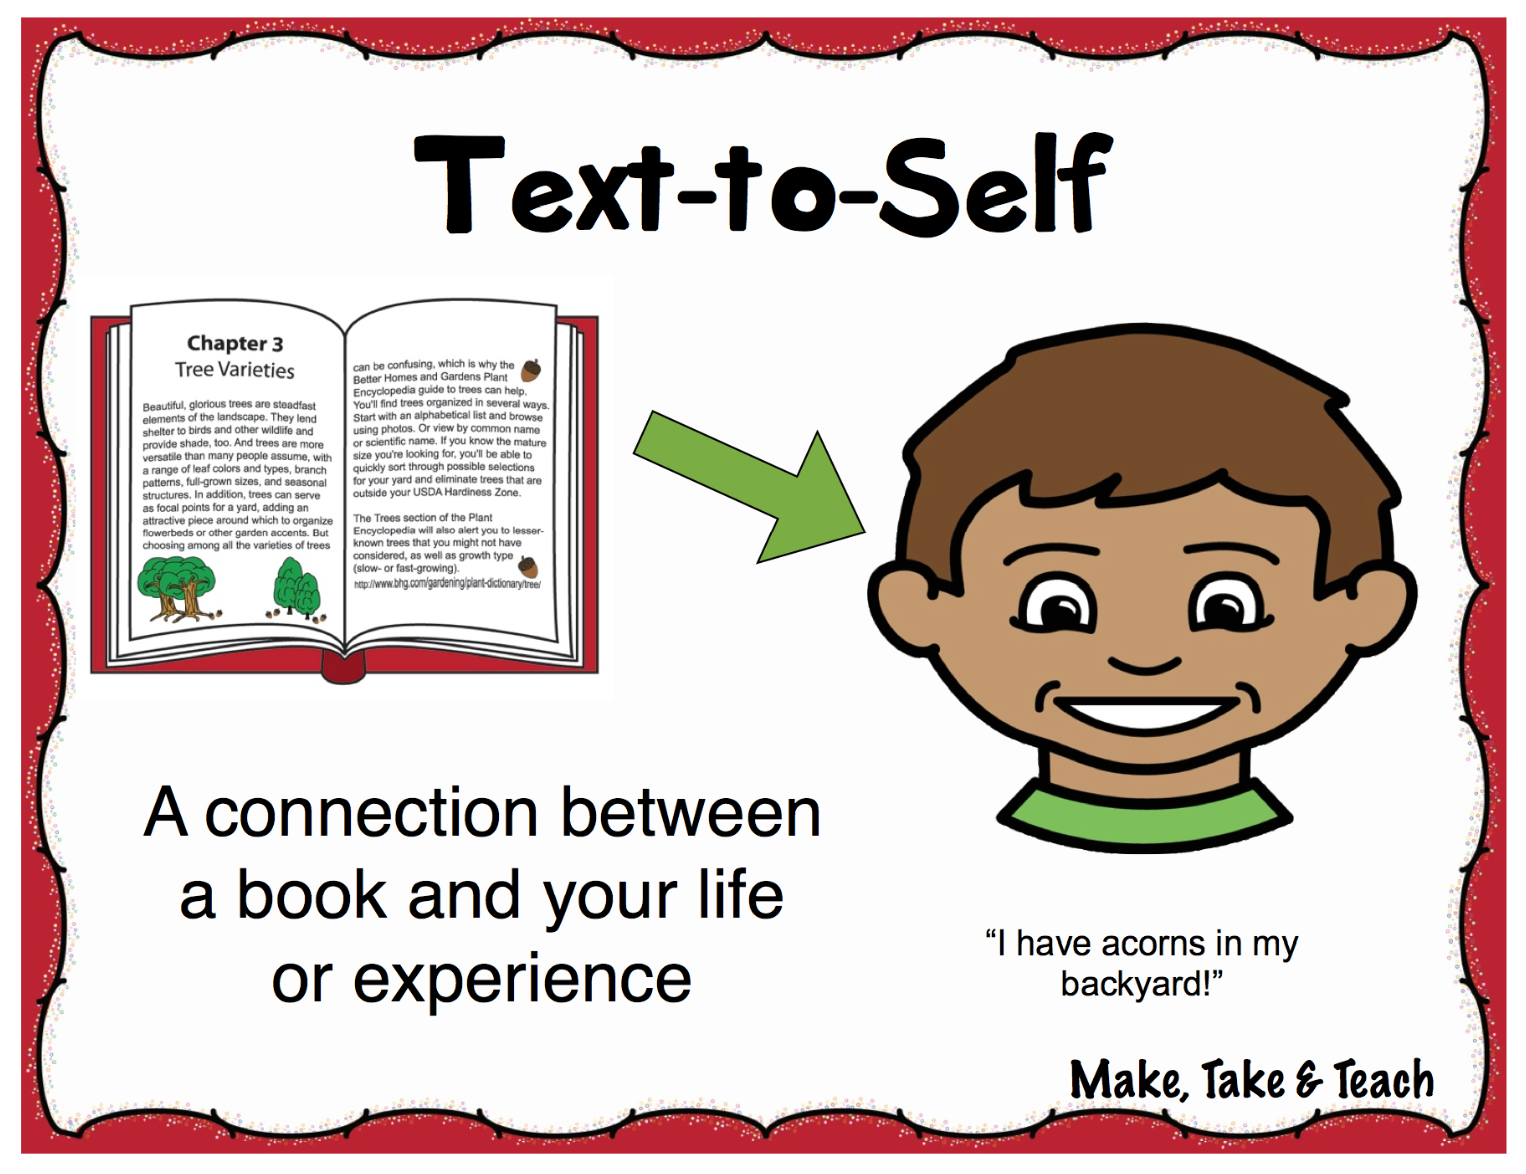 Self connect. Self text. To text. Self connection. Improve reading.